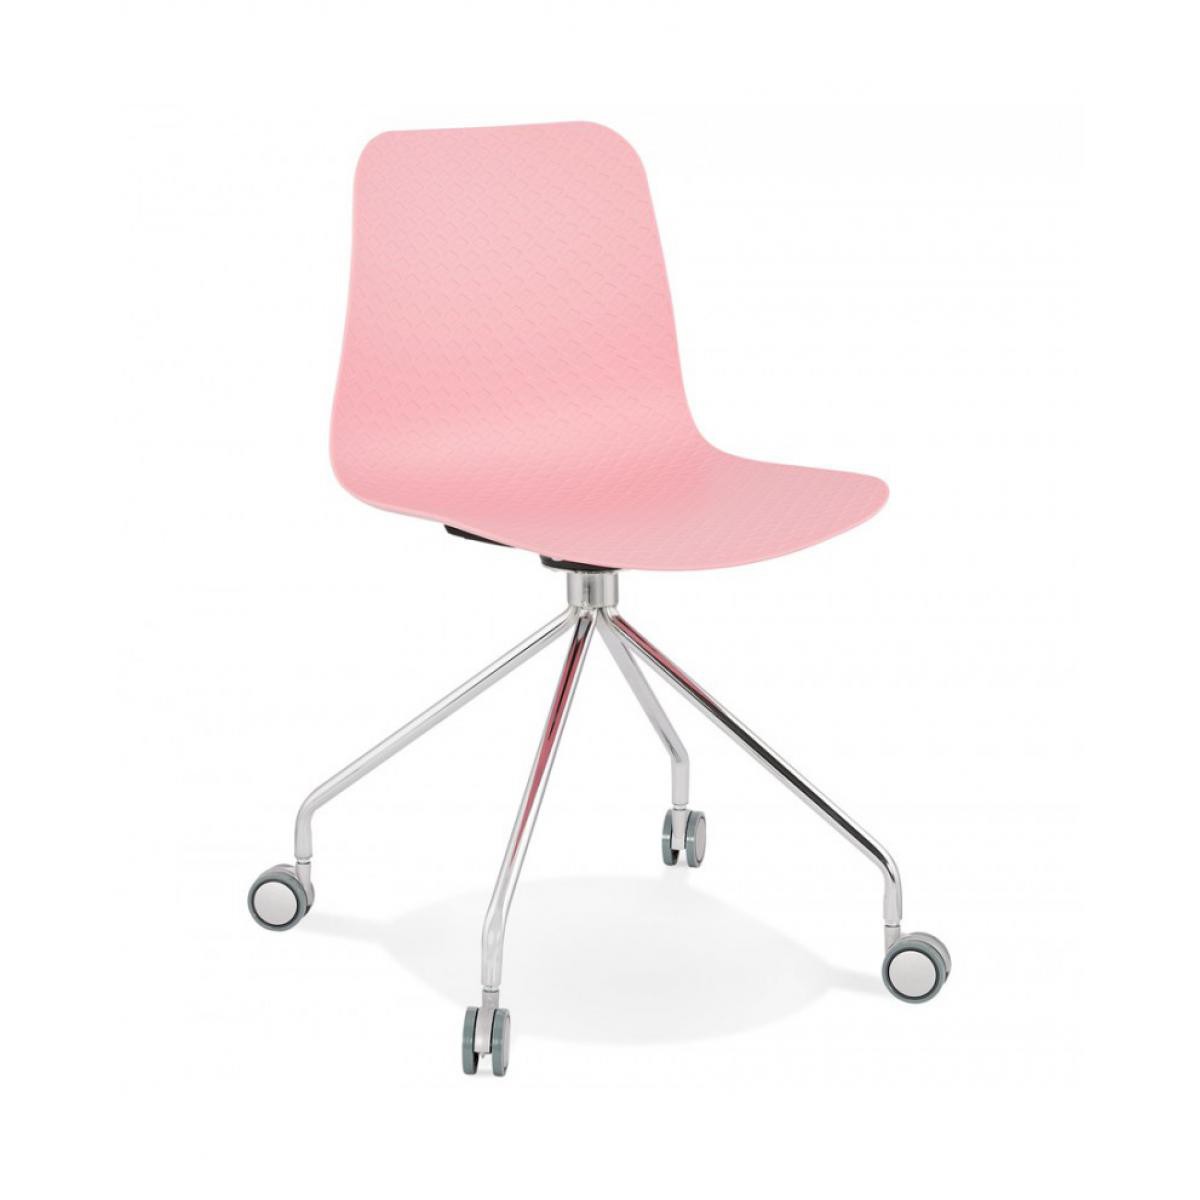 Kokoon Design - Chaise design RULLE PINK 47x49x80 cm - Chaises